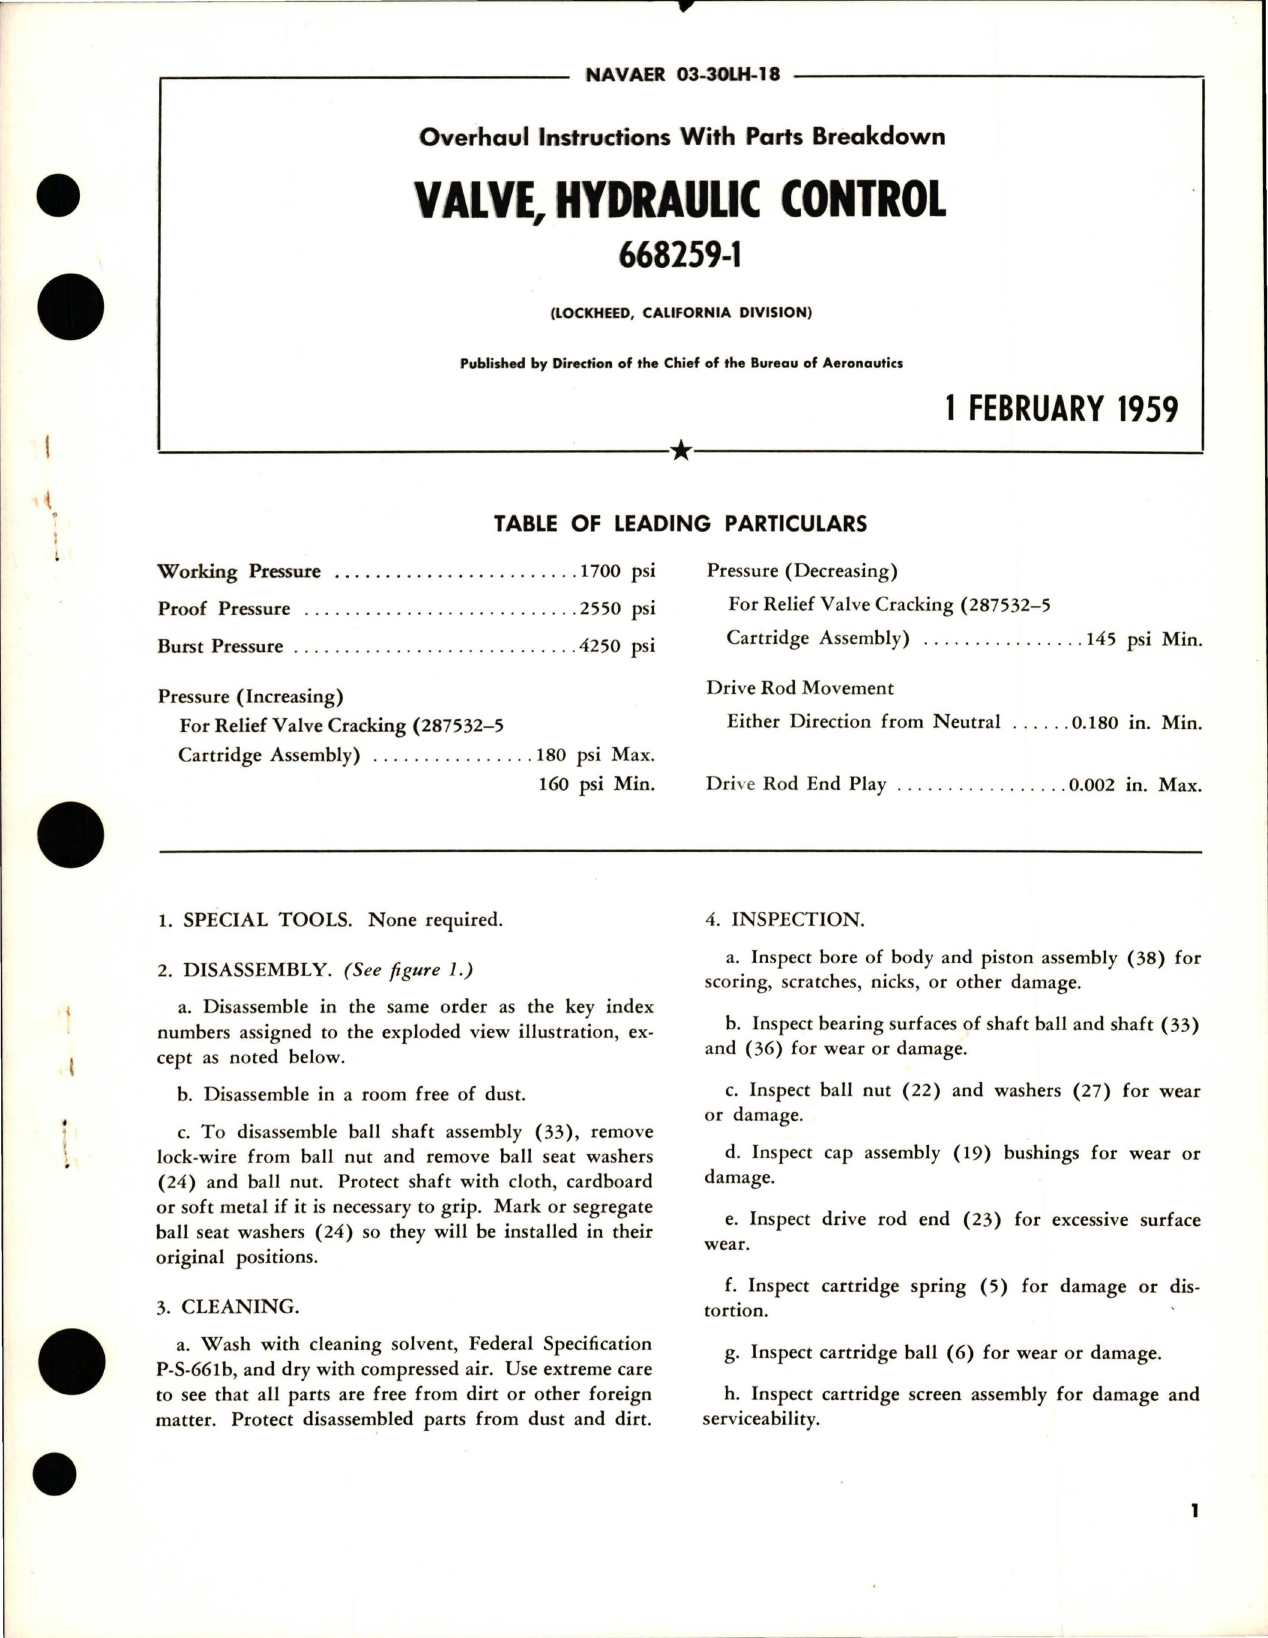 Sample page 1 from AirCorps Library document: Overhaul Instructions with Parts Breakdown for Hydraulic Control Valve - 668259-1